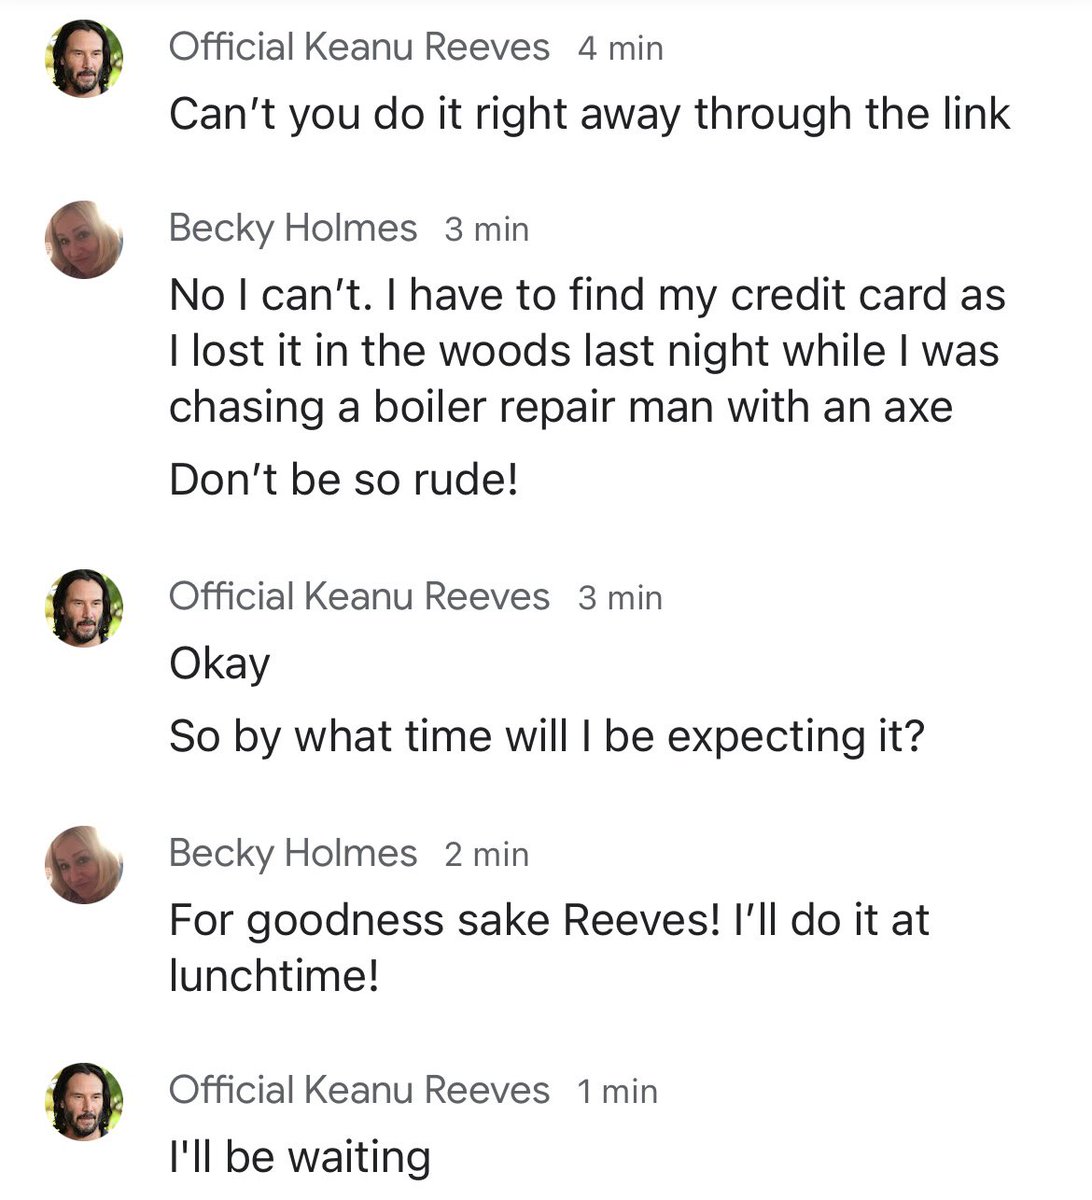 I probably shouldn’t admit this but I’m getting cross with Keanu Reeves

I understand that he needs a £50 gift voucher but in return he needs to understand that I lost my credit card whilst chasing someone with a axe

Surely a bit of give and take in a relationship is reasonable?